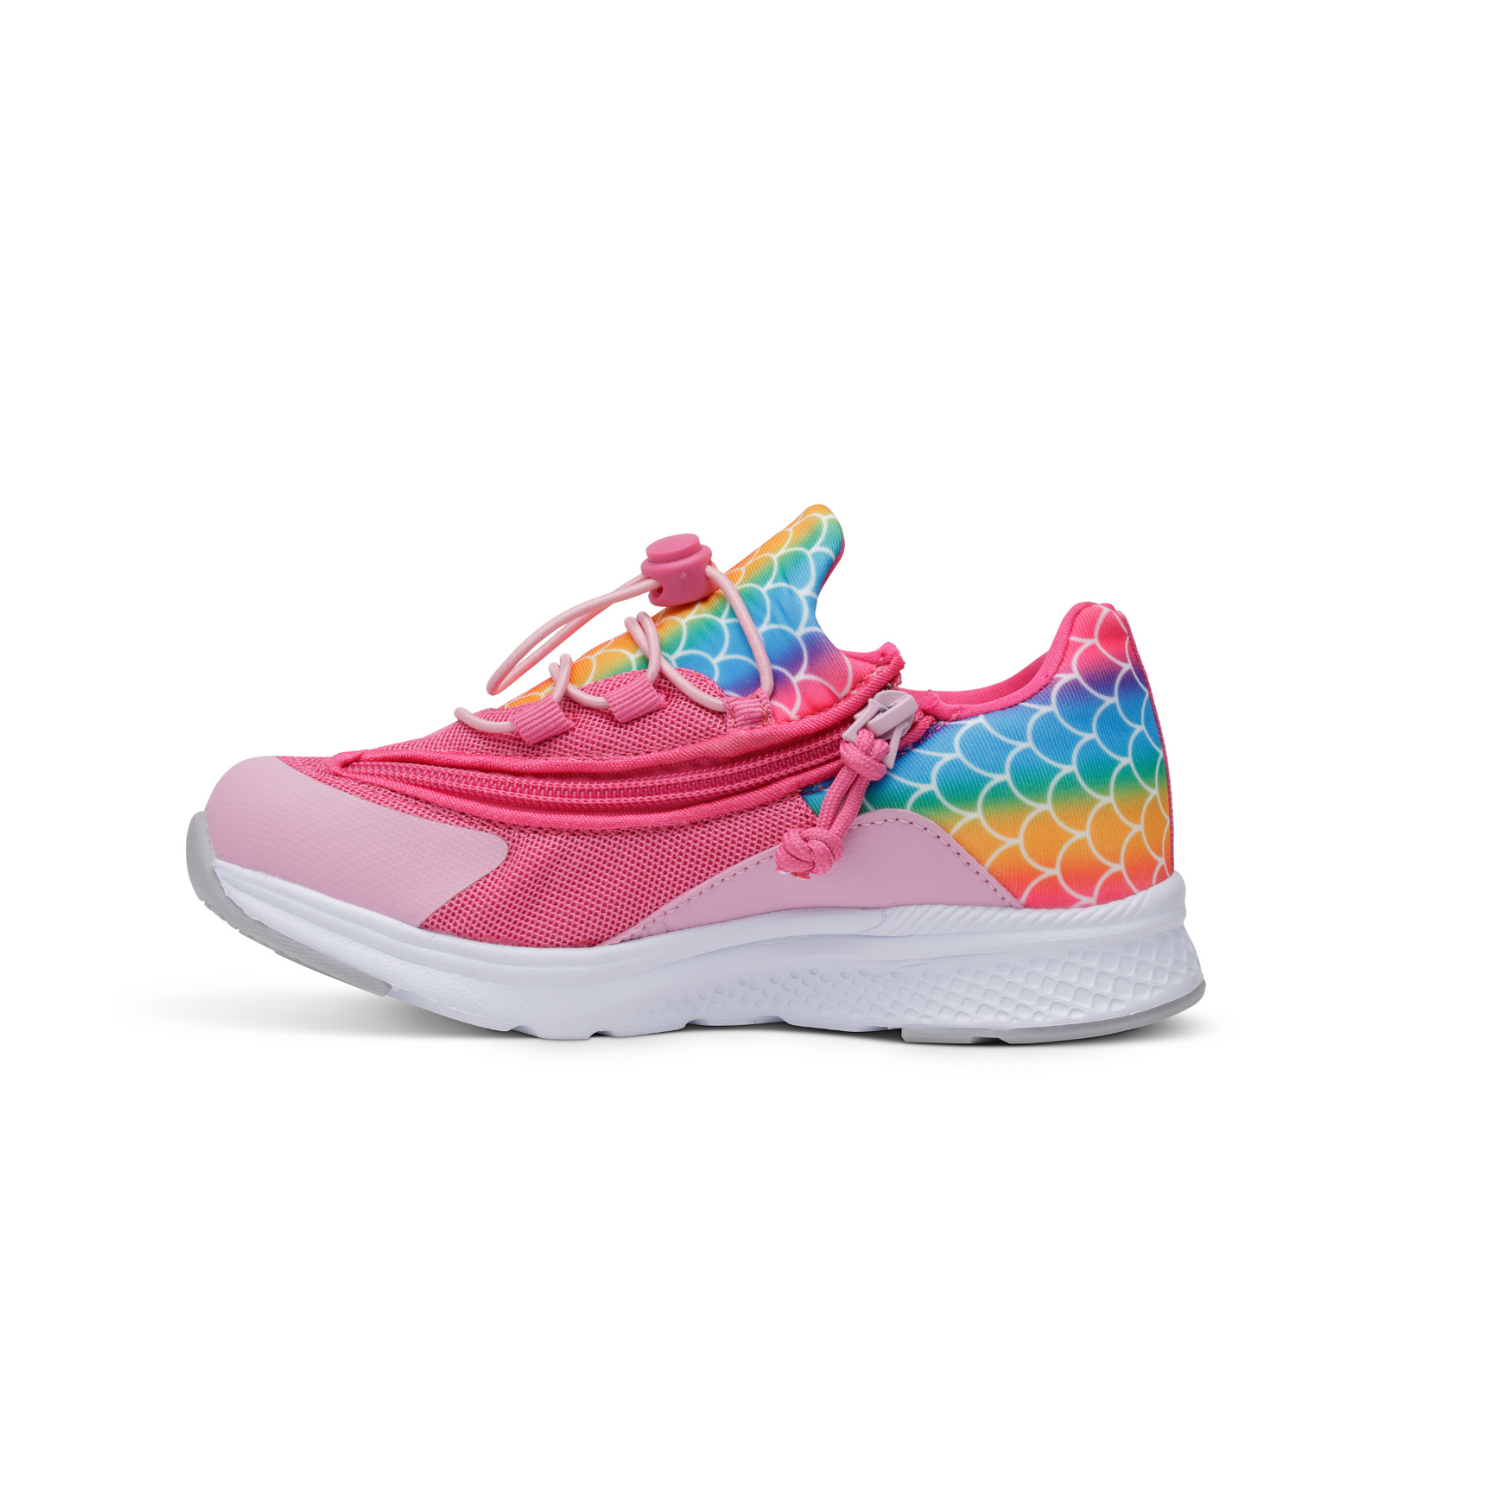 Girl's Mermaid Lightweight Shoes with Rear Zipper Closed